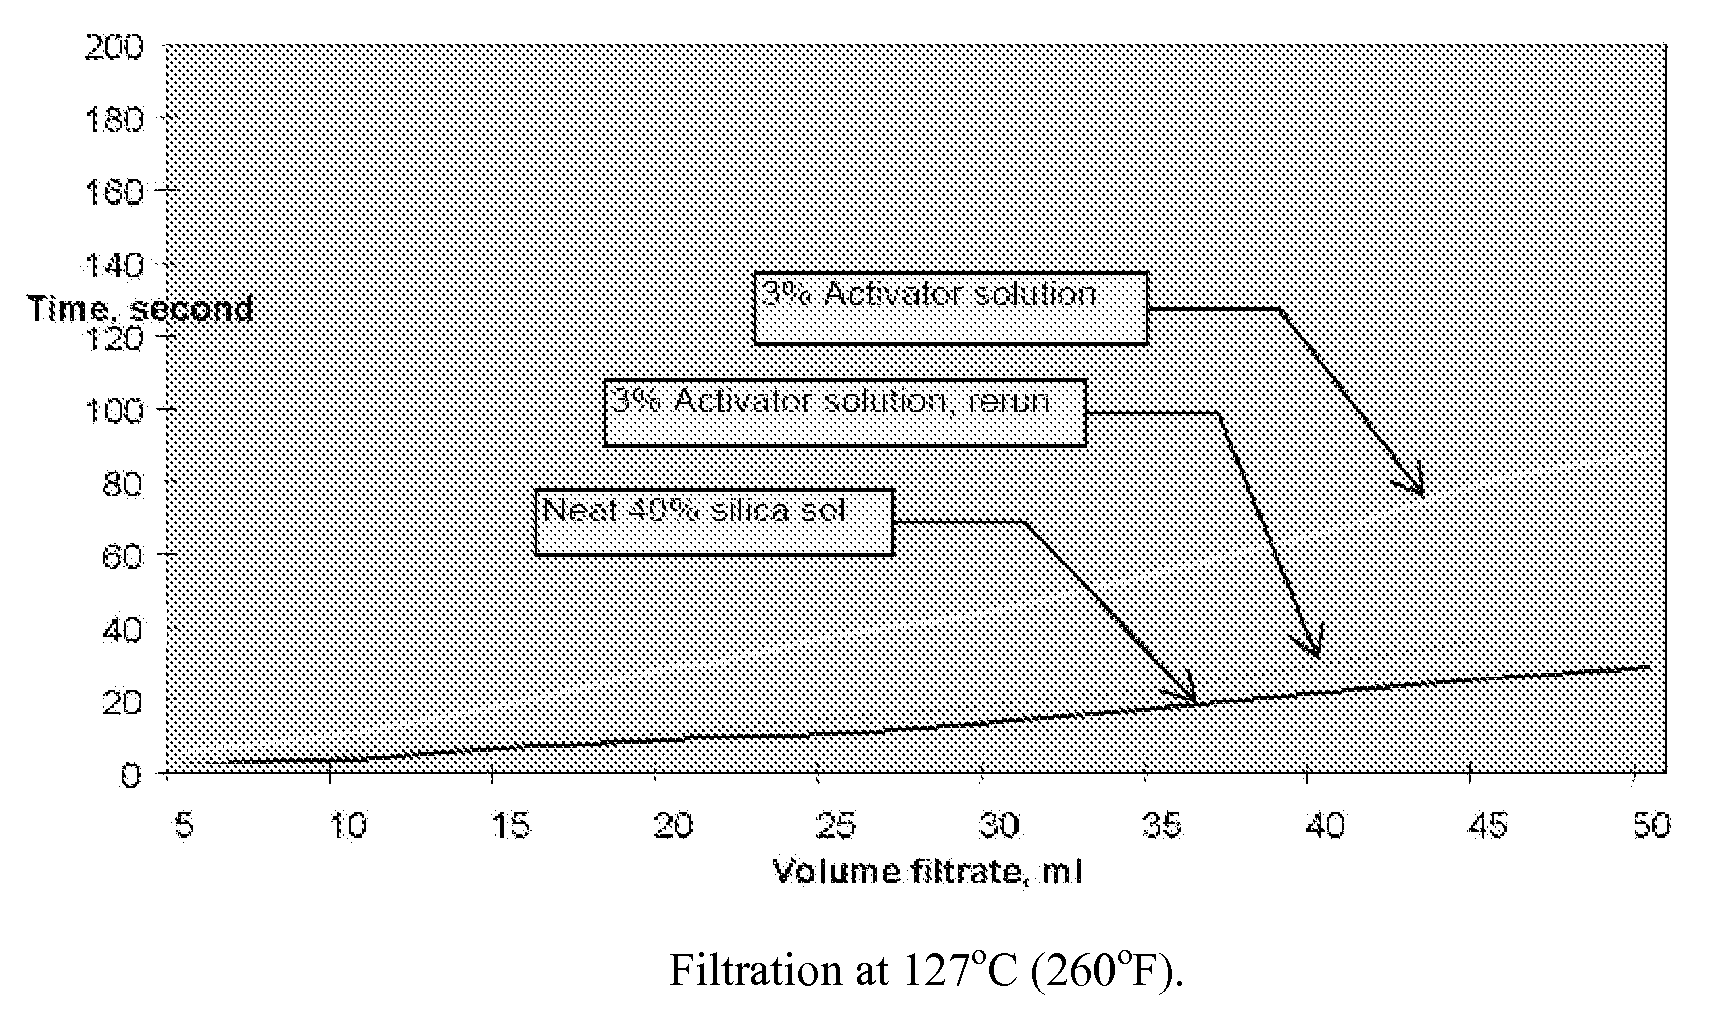 Tight formation water shut off method with silica gel